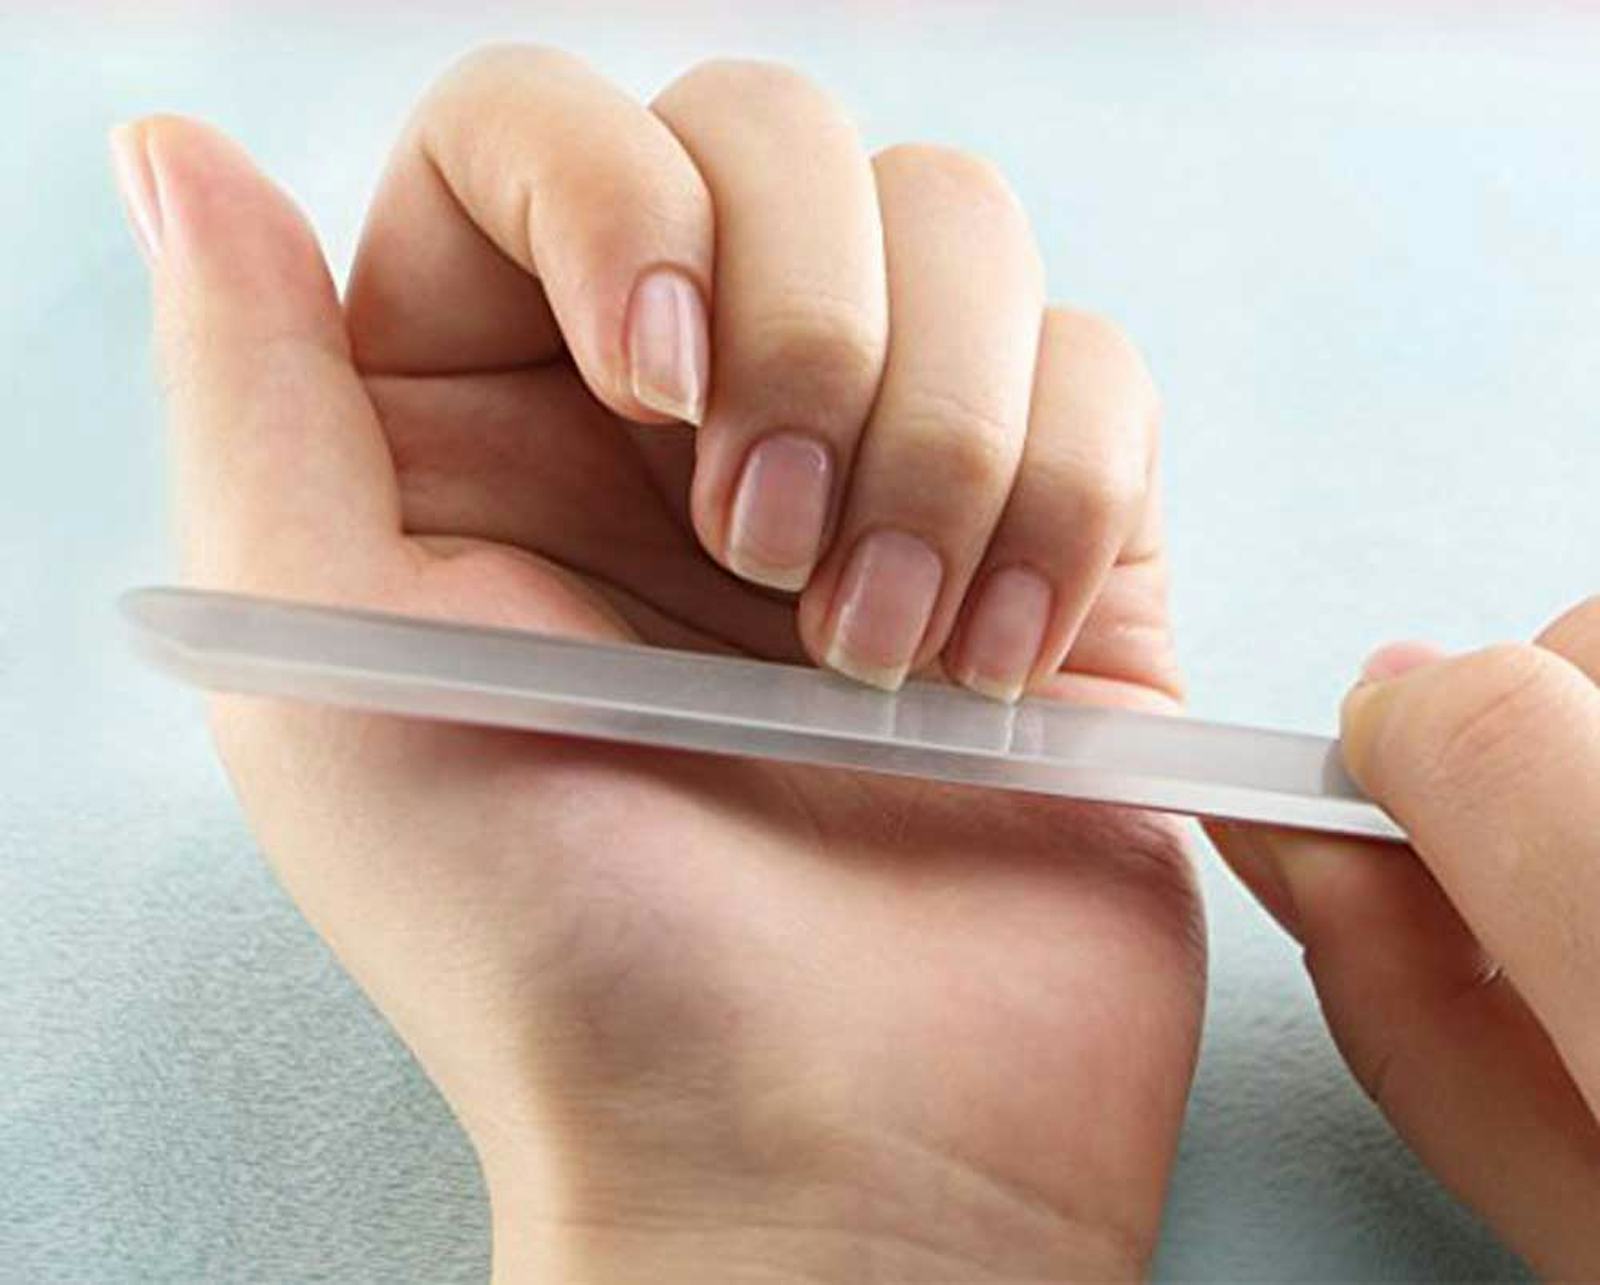 Beauty by Design Nail File - Amazon.com - wide 3